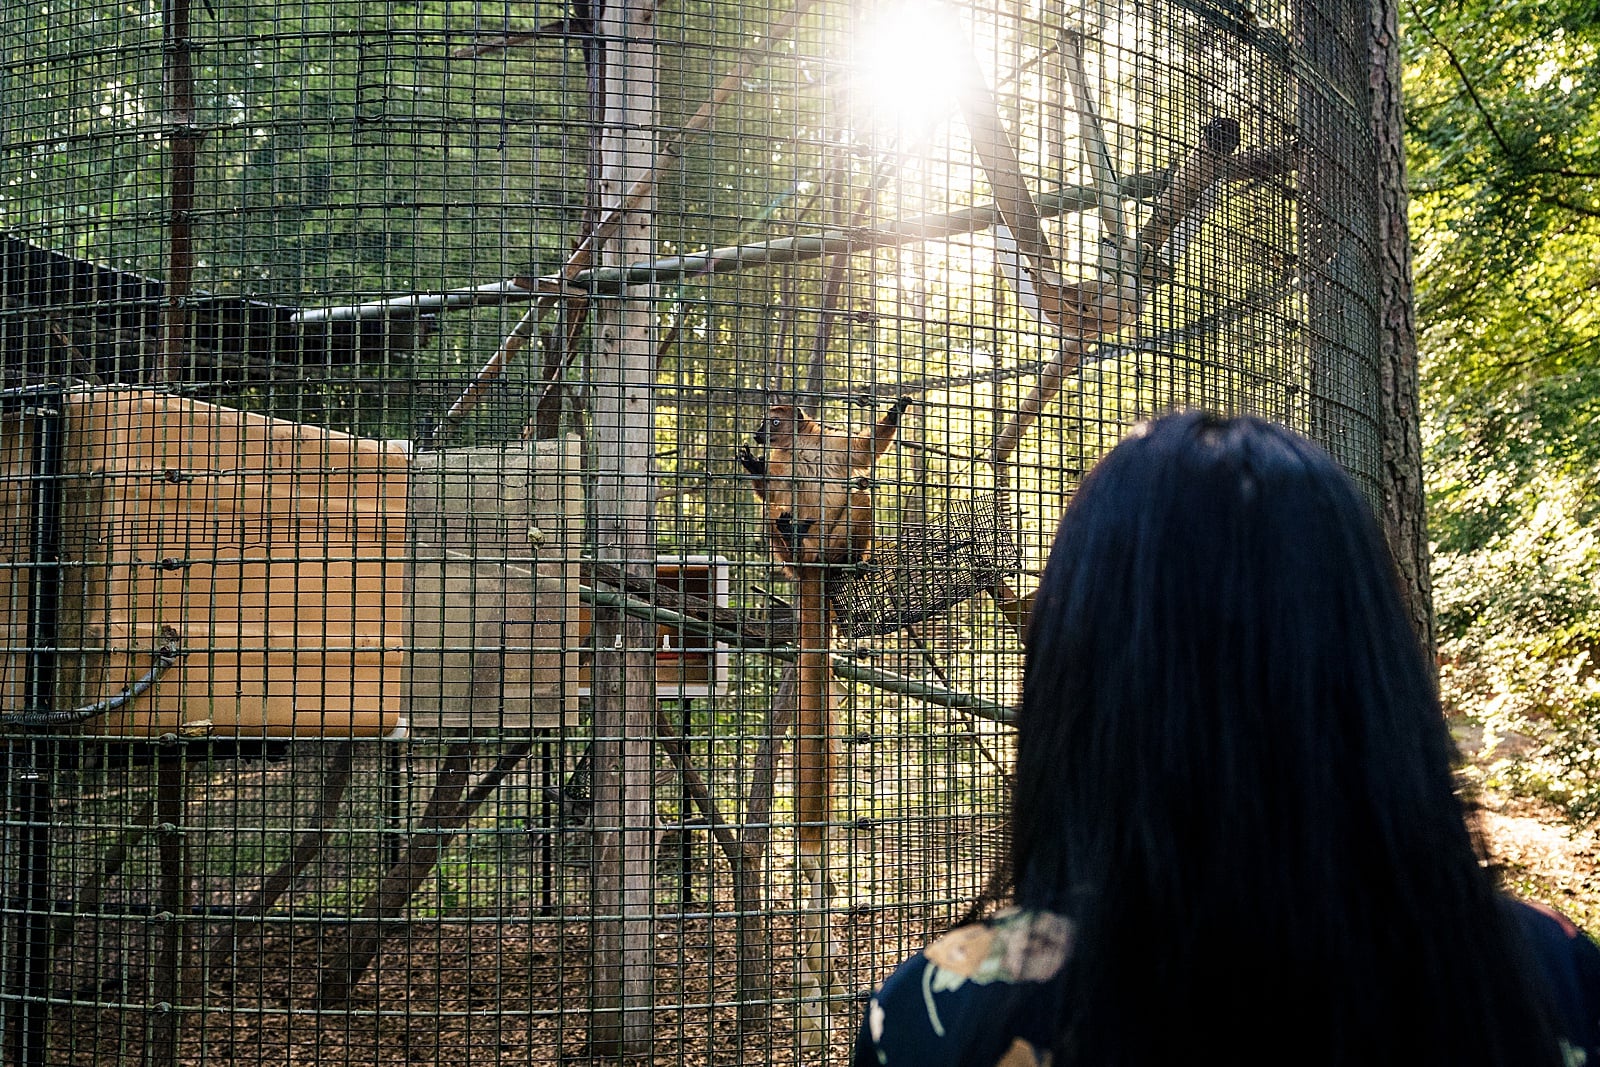 a wedding guest looks on as a lemur climbs in her cage at this lemur center wedding